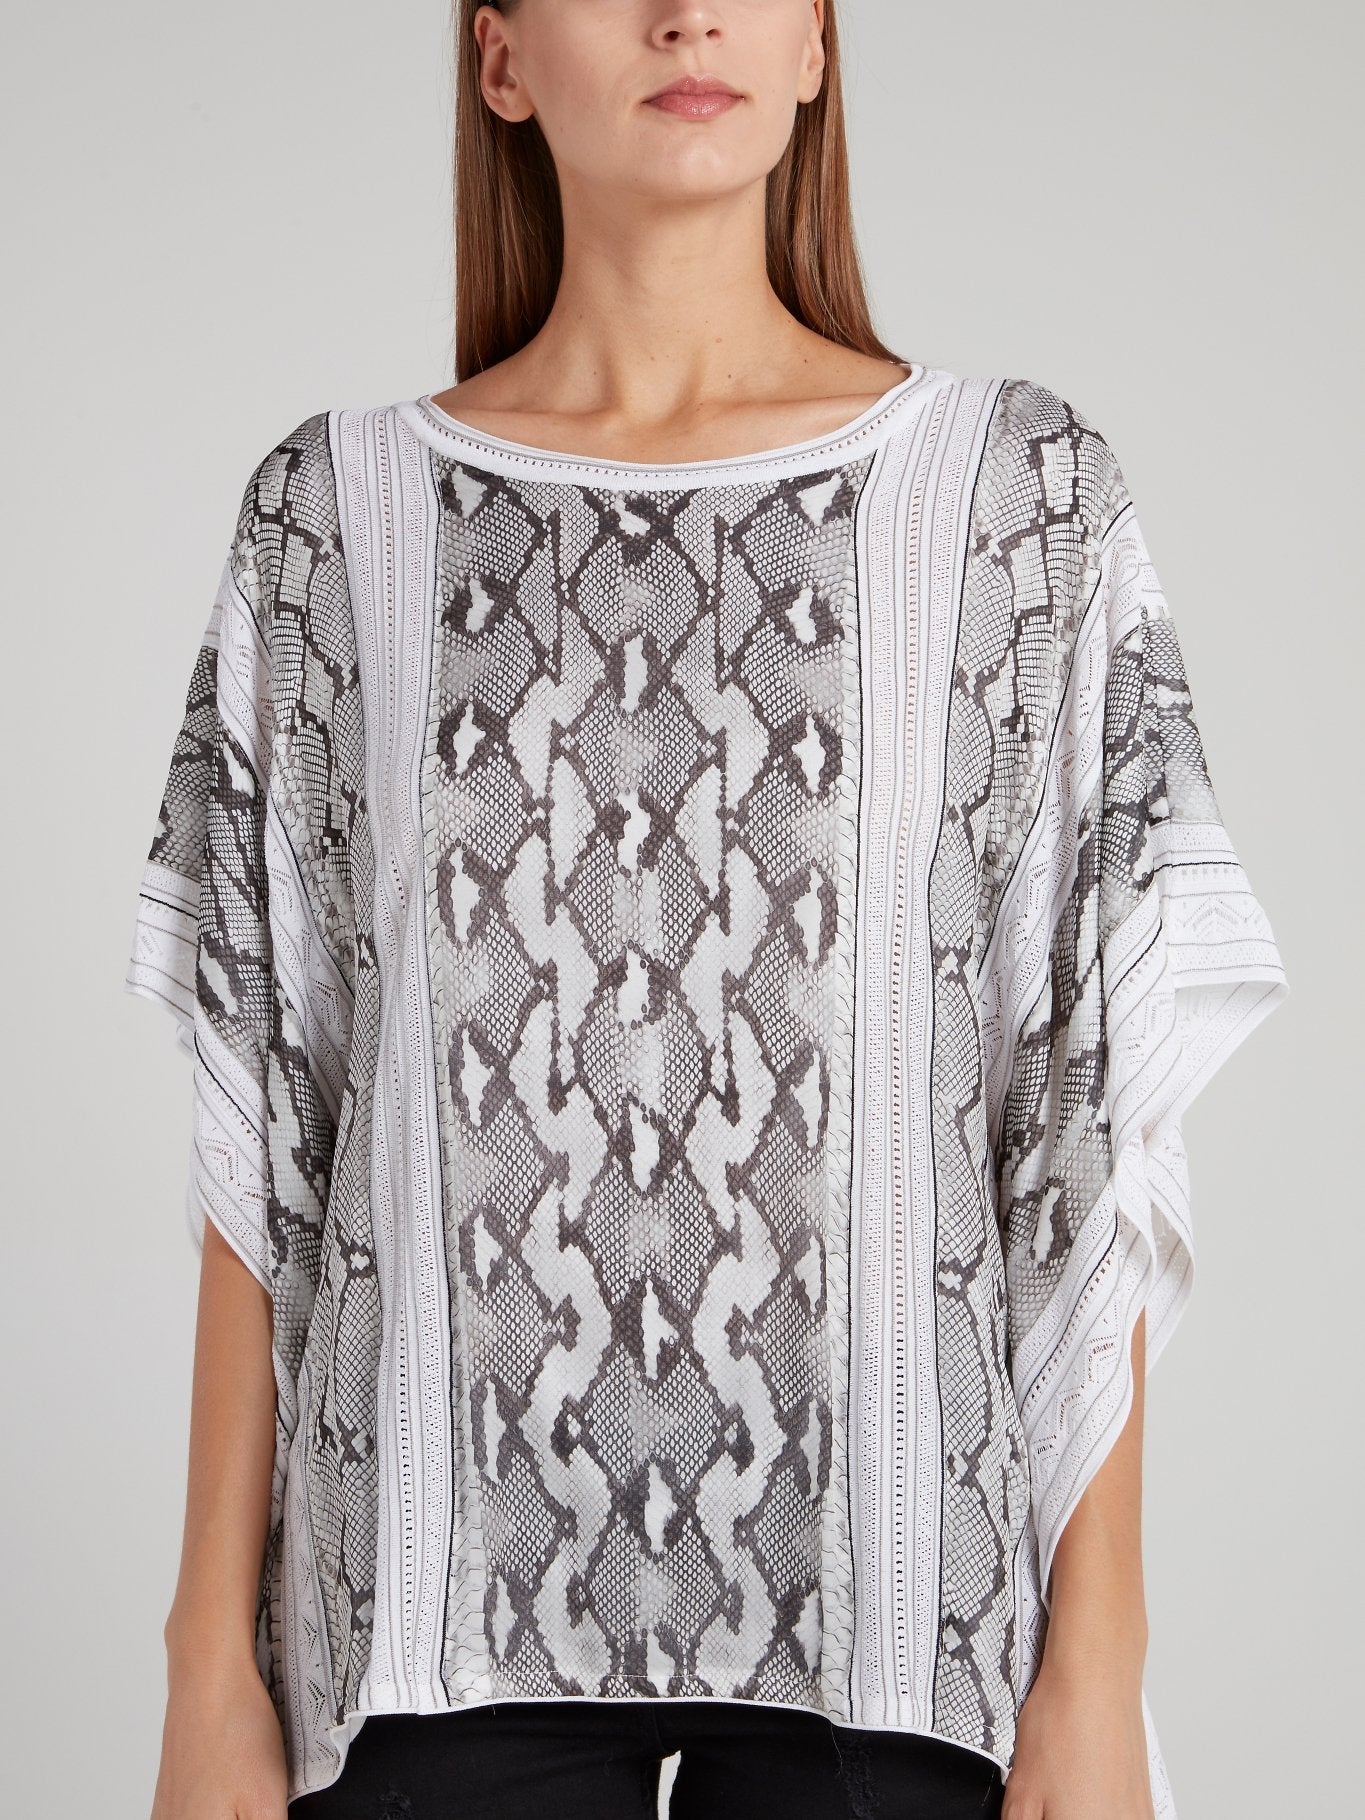 Snake Effect Square Top